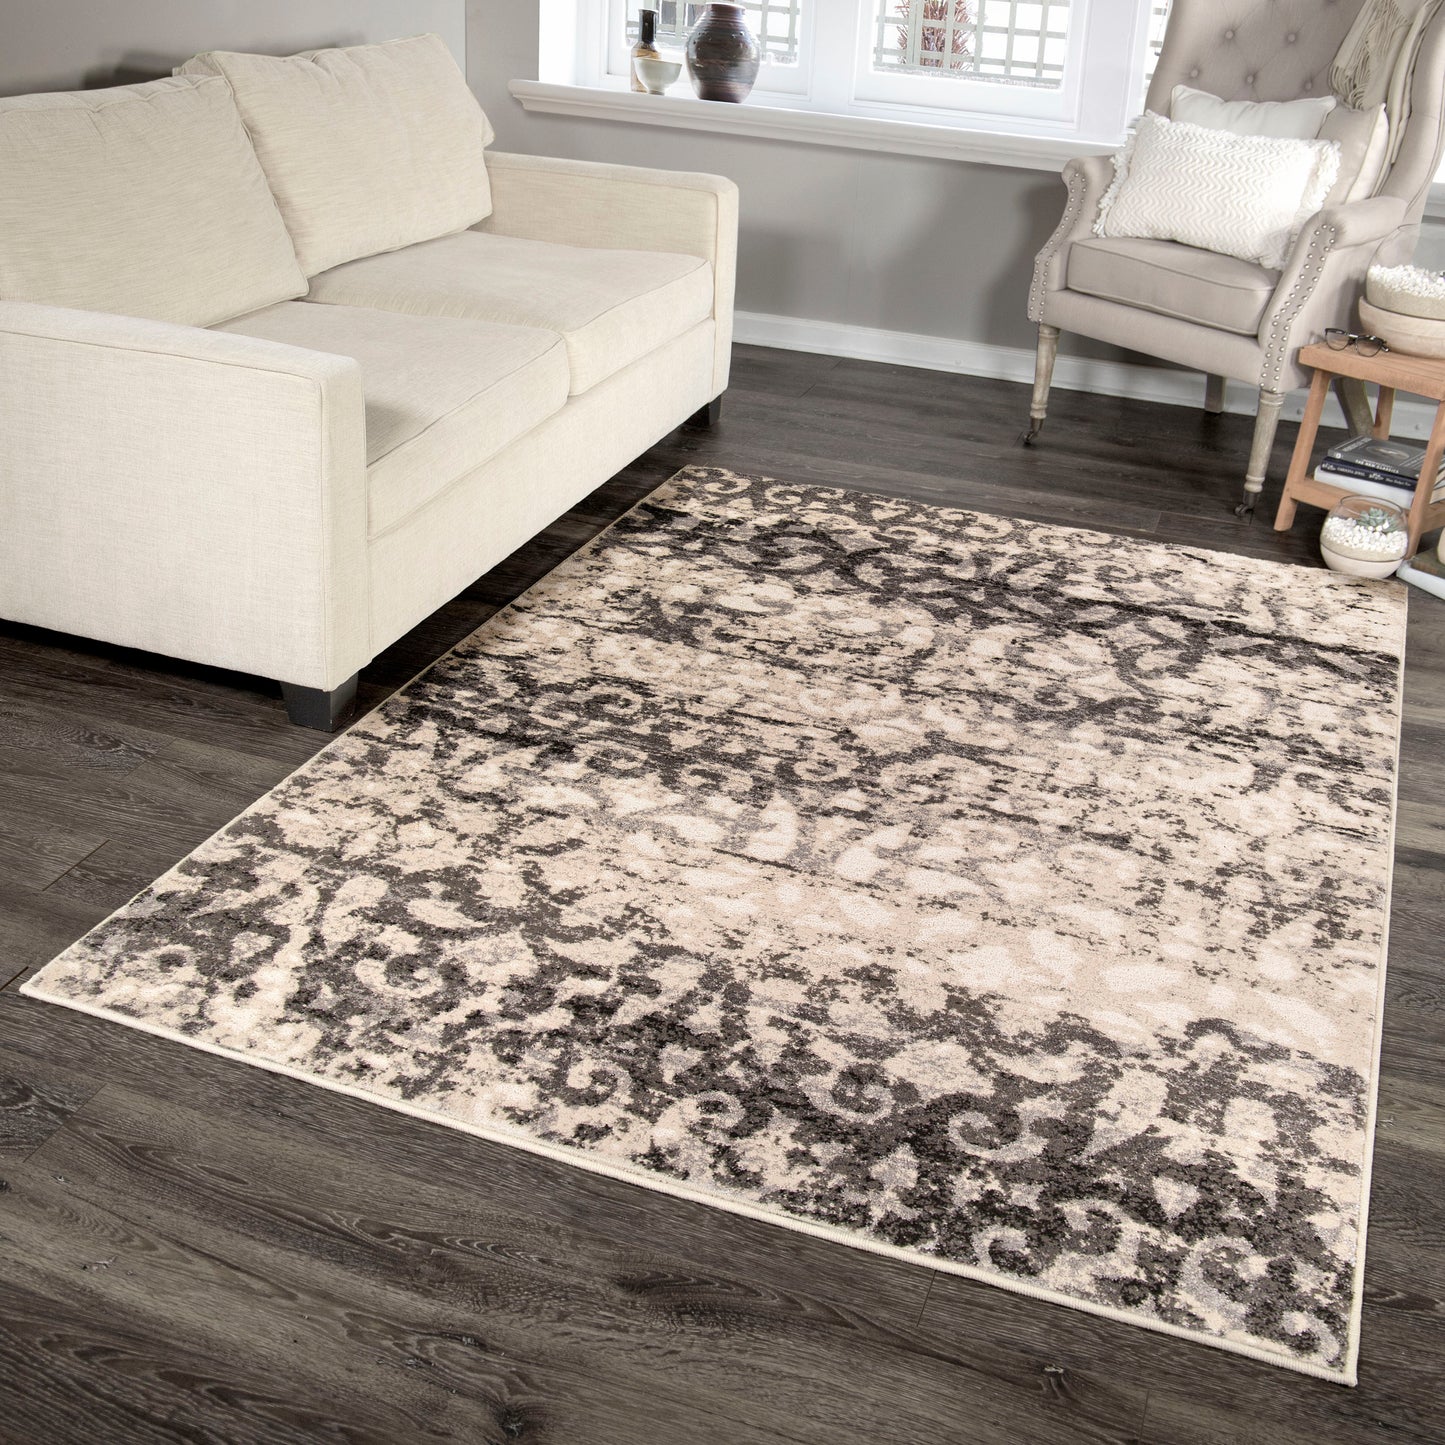 Illusions Buxtonbliss Synthetic Blend Indoor Area Rug by Orian Rugs